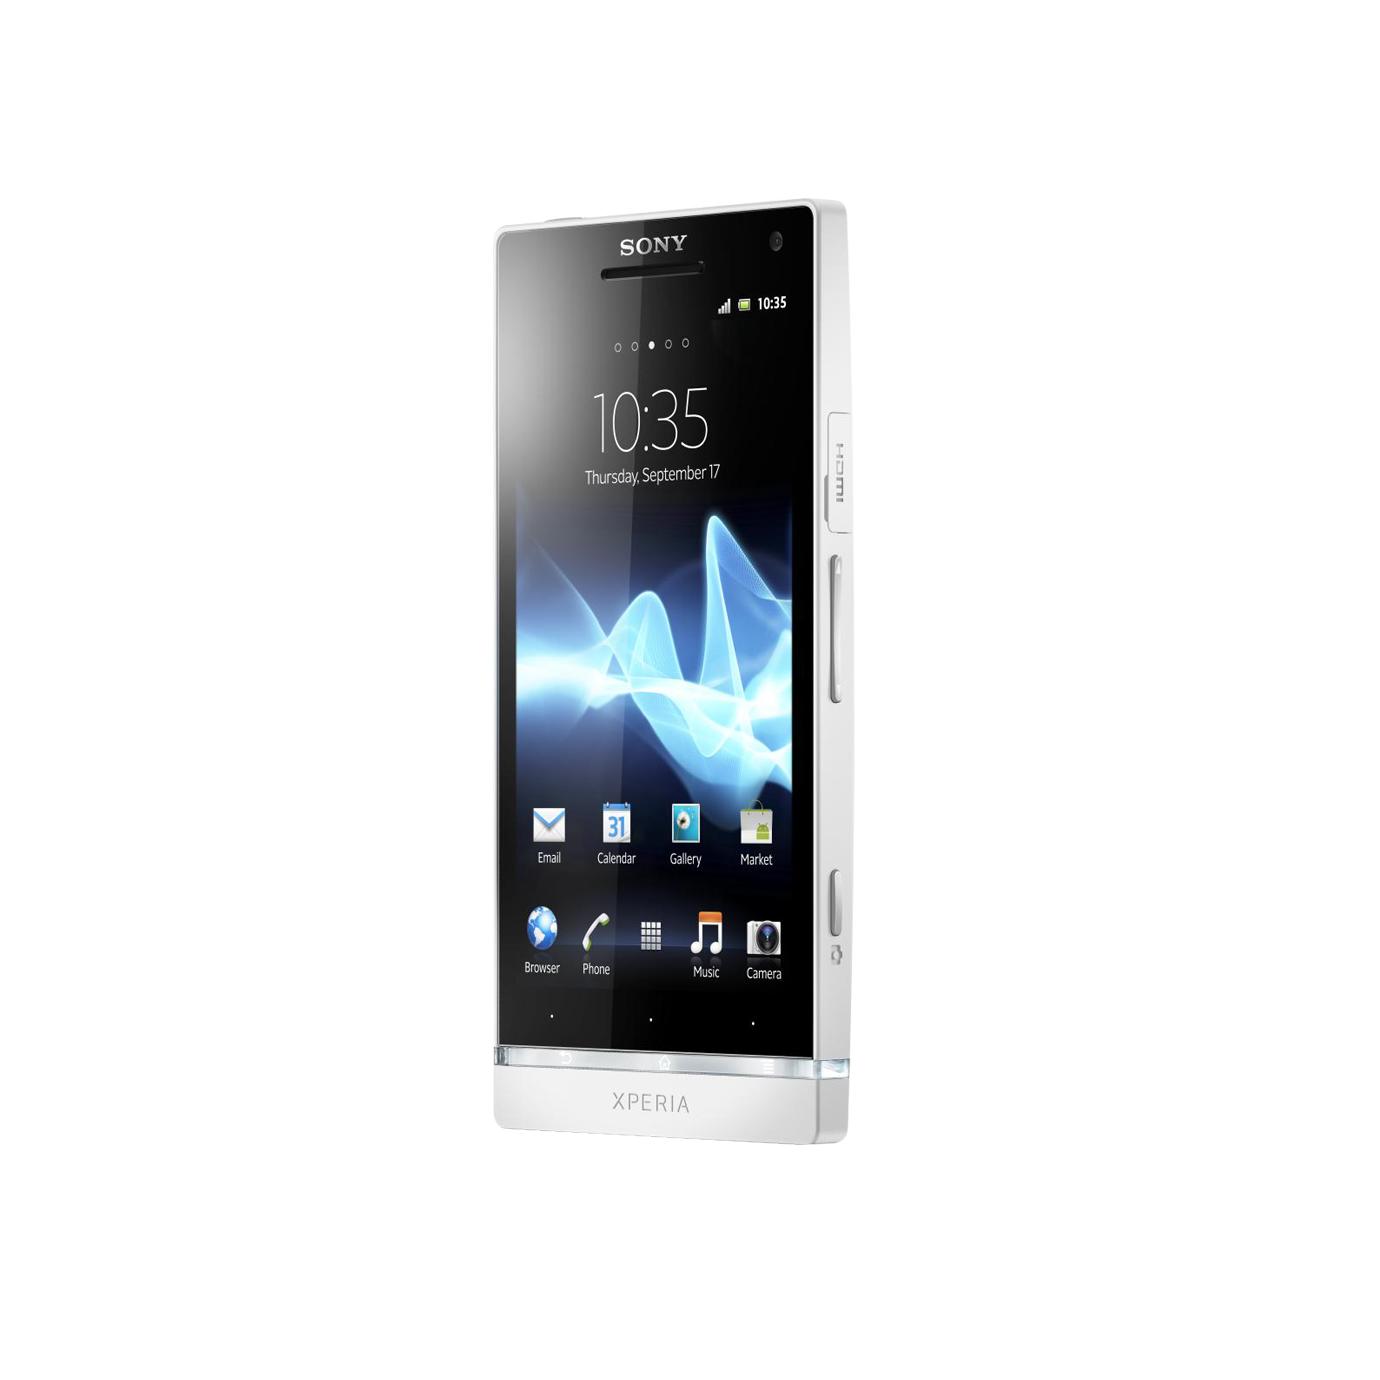 Xperia-S-from-Sony.png